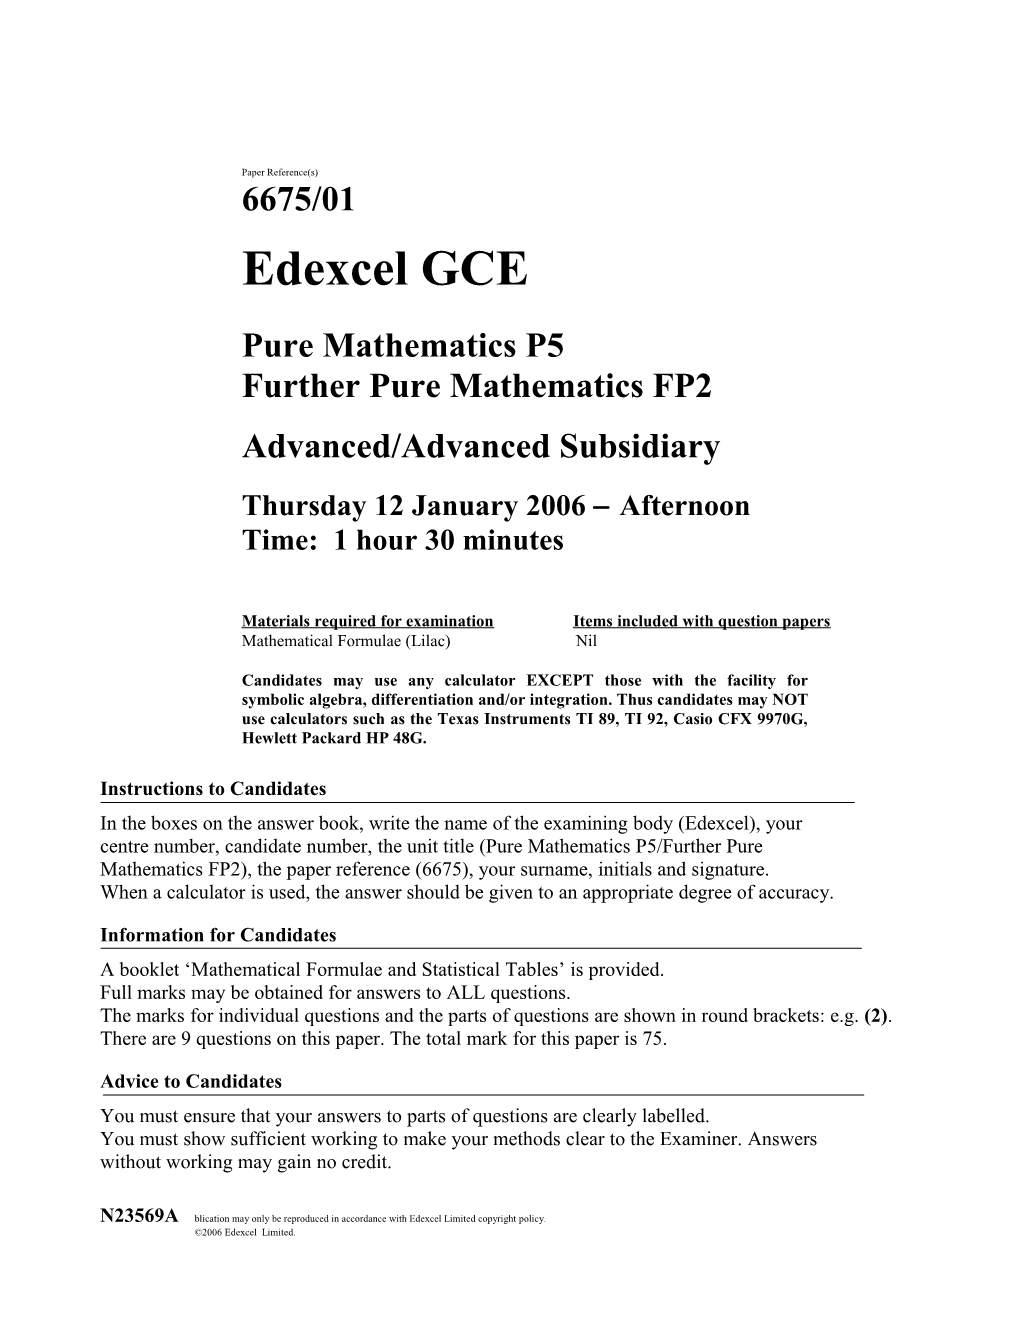 Past Paper - 6675 Pure P5 and Further Pure FP2 Jan 2006